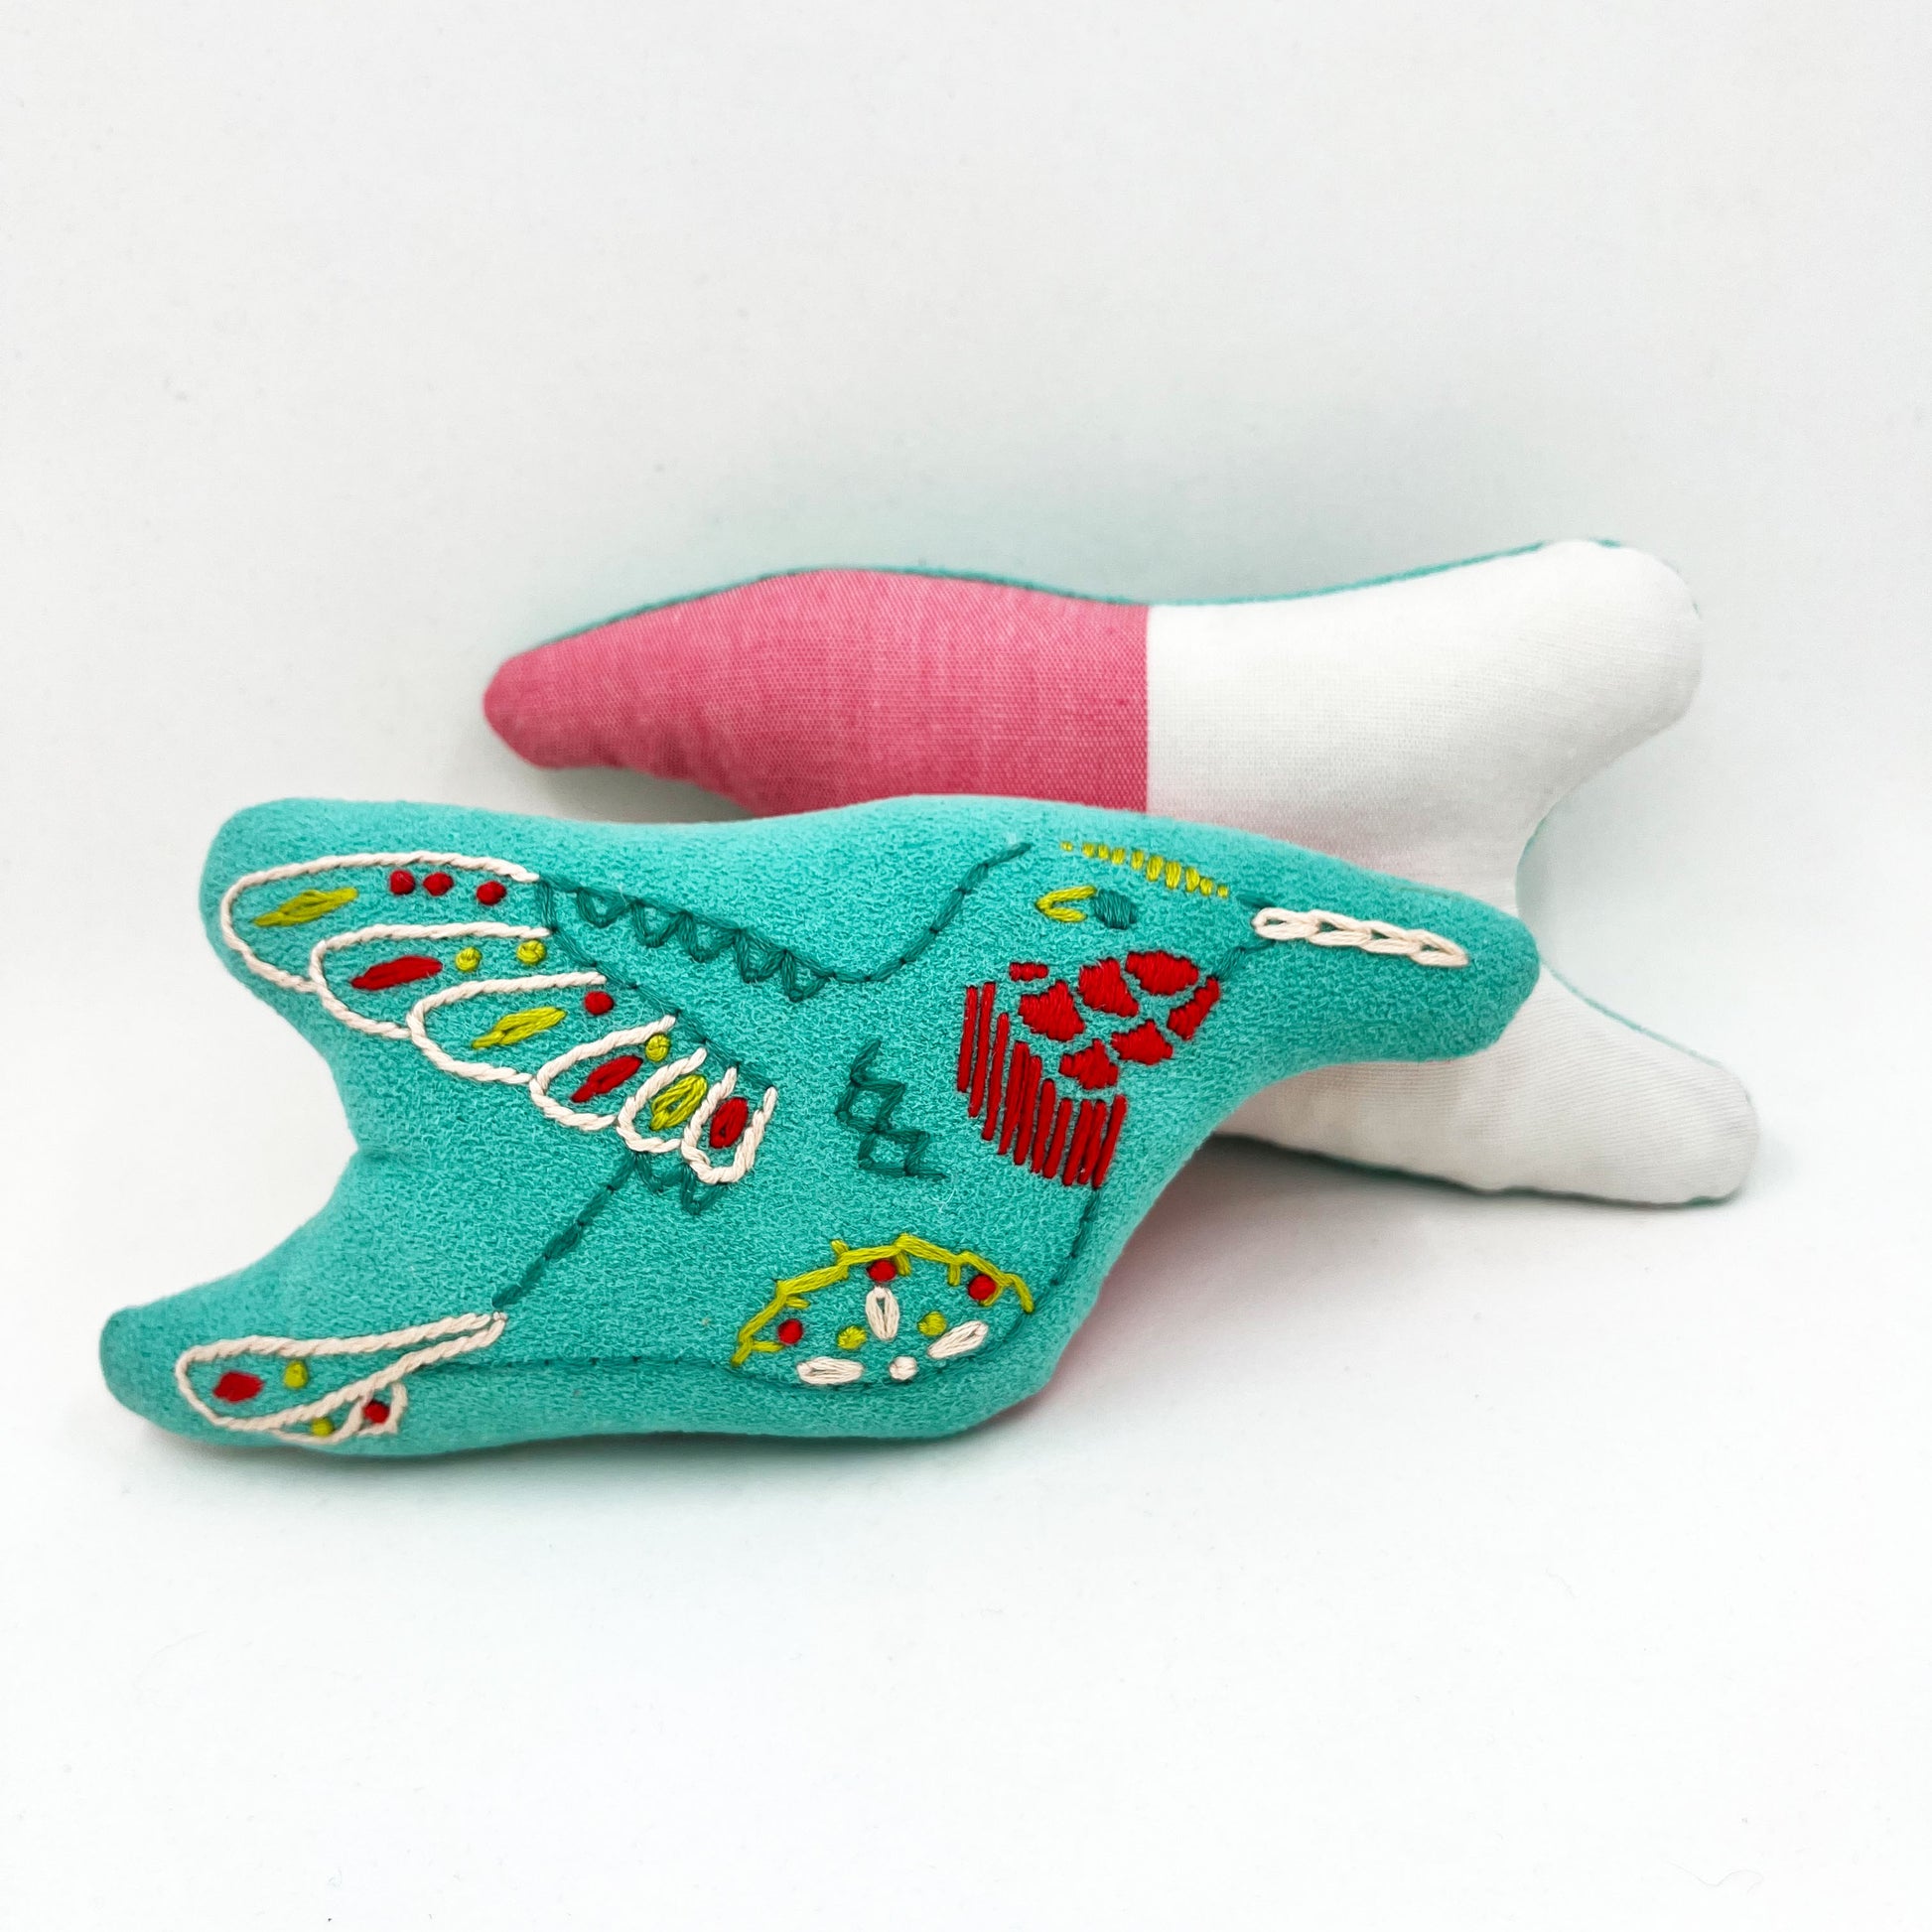 a colorfully hand embroidered stuffed pillow animal of a hummingbird on aqua fabric, behind it one turned around showing the back side made of half white half pink fabric